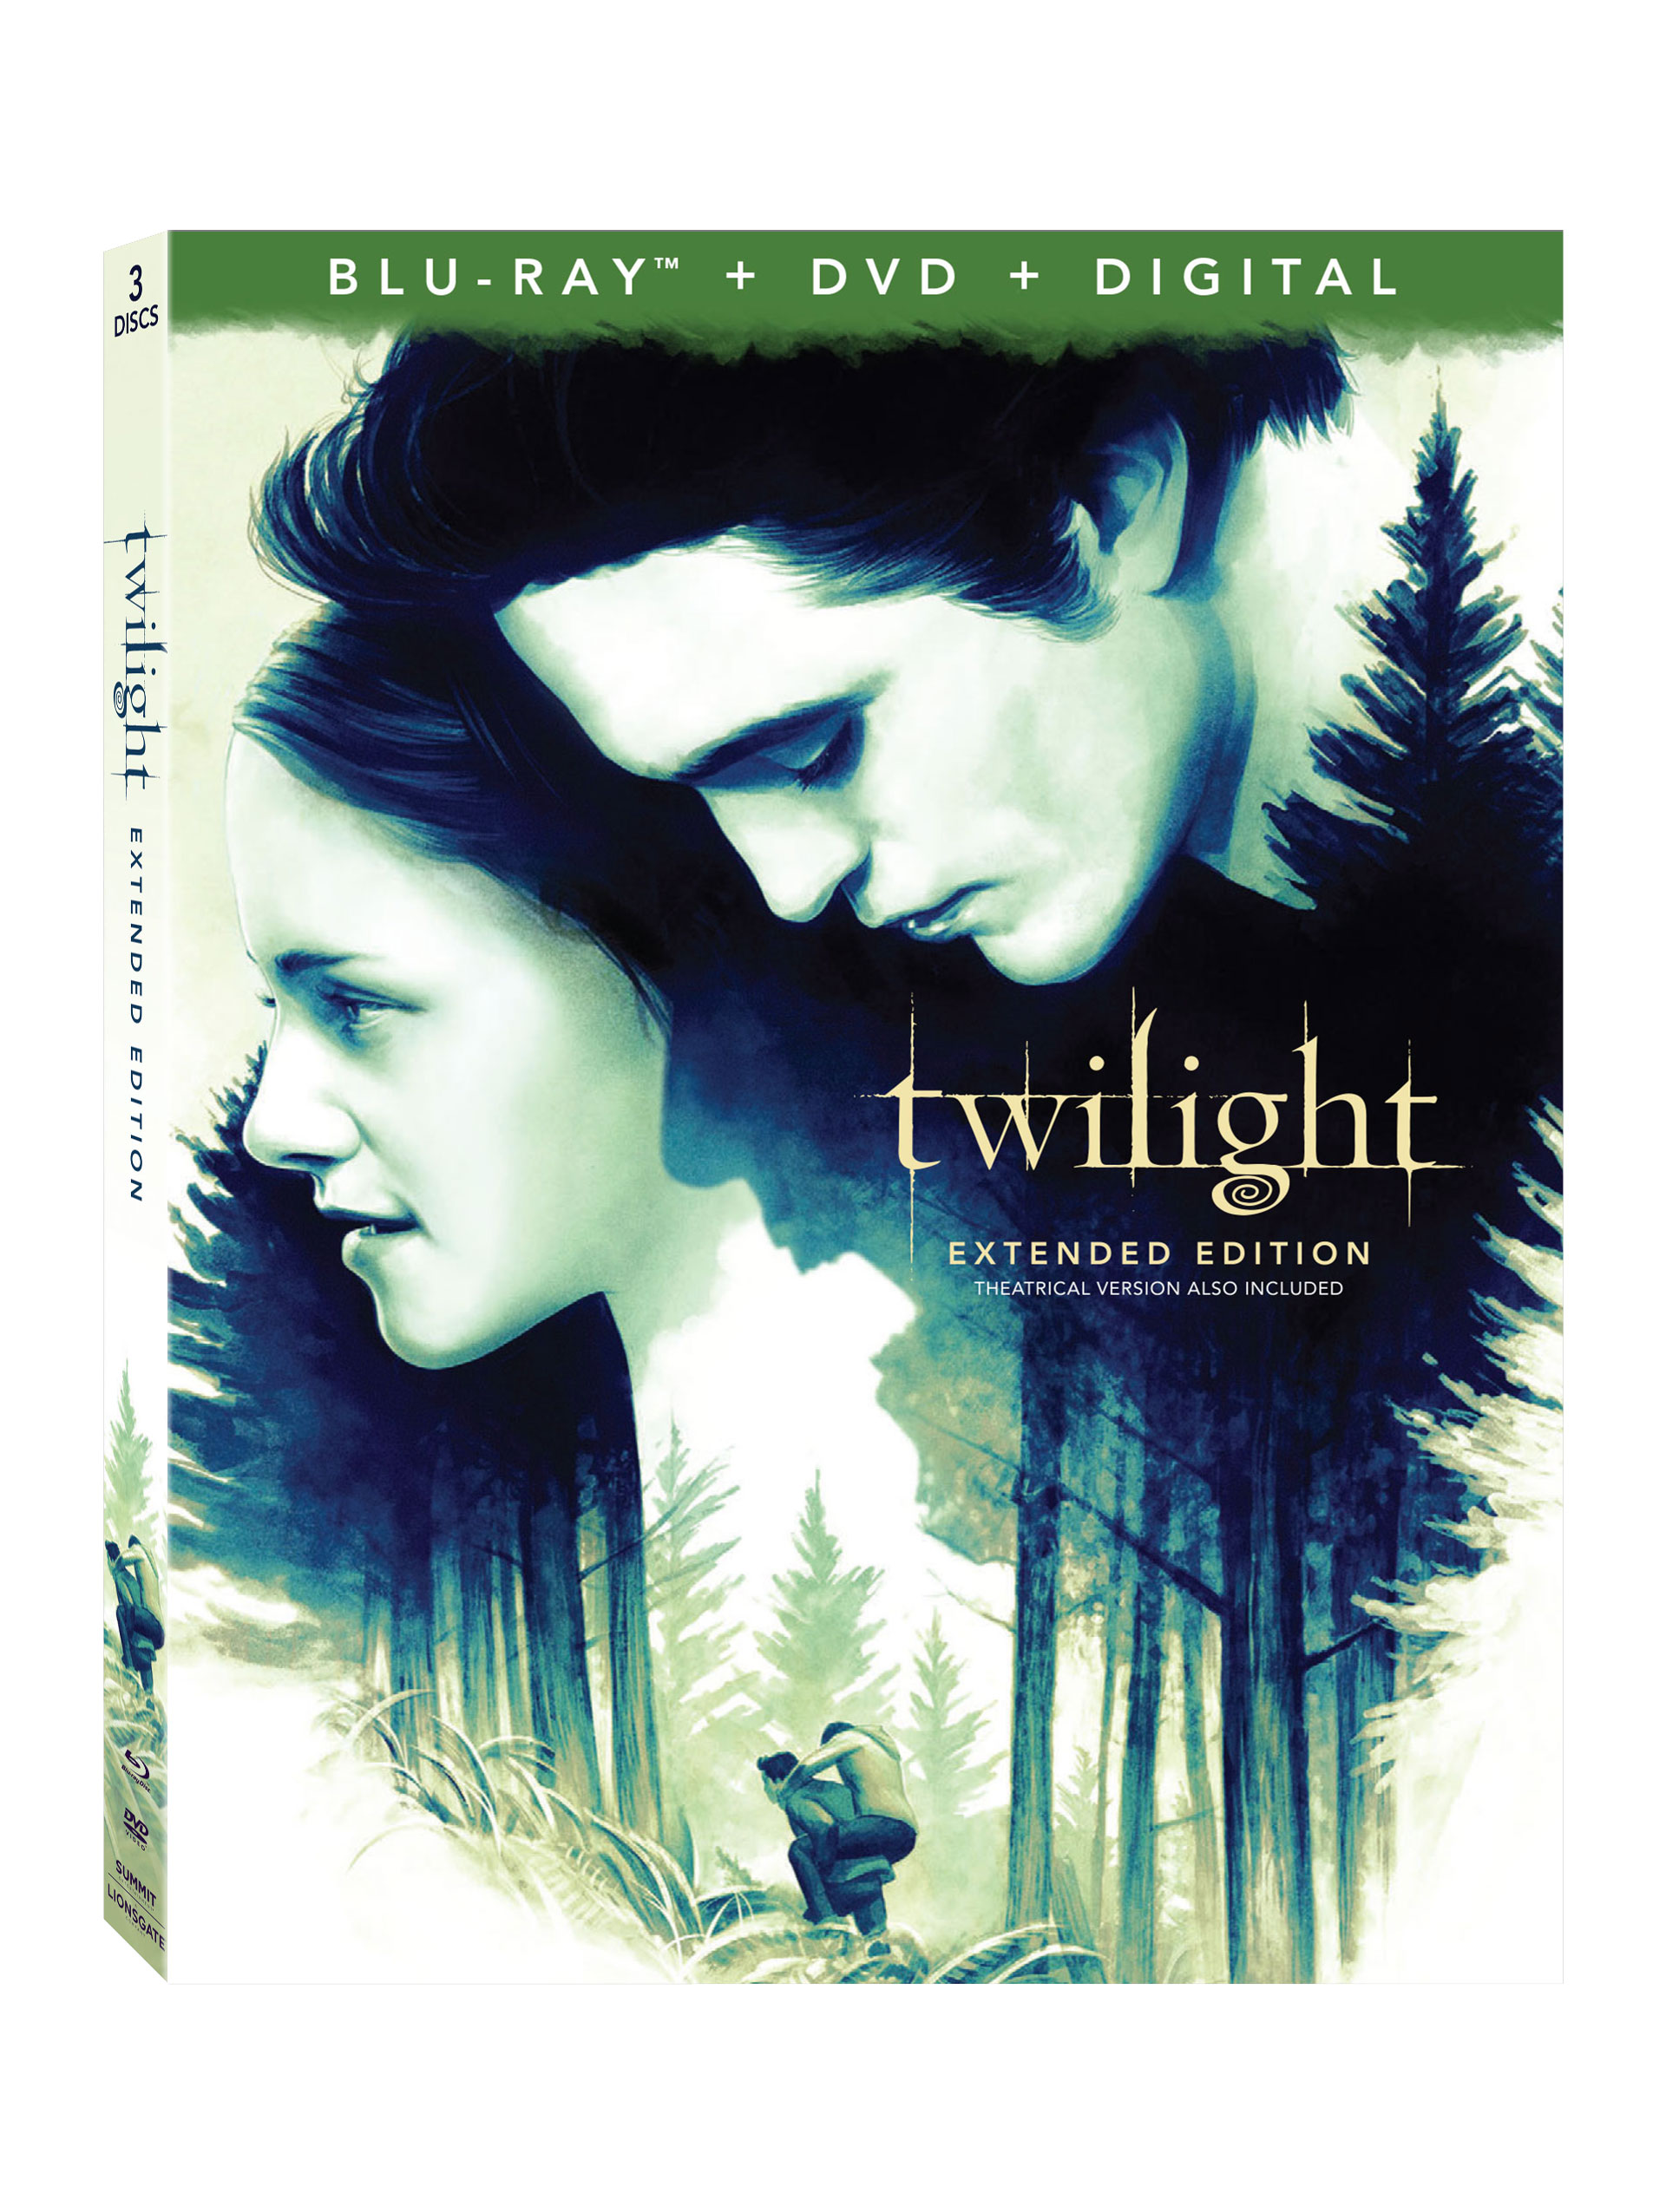 The Twilight Saga Blu-Ray Combo Pack Cover (Lionsgate Home Entertainment)